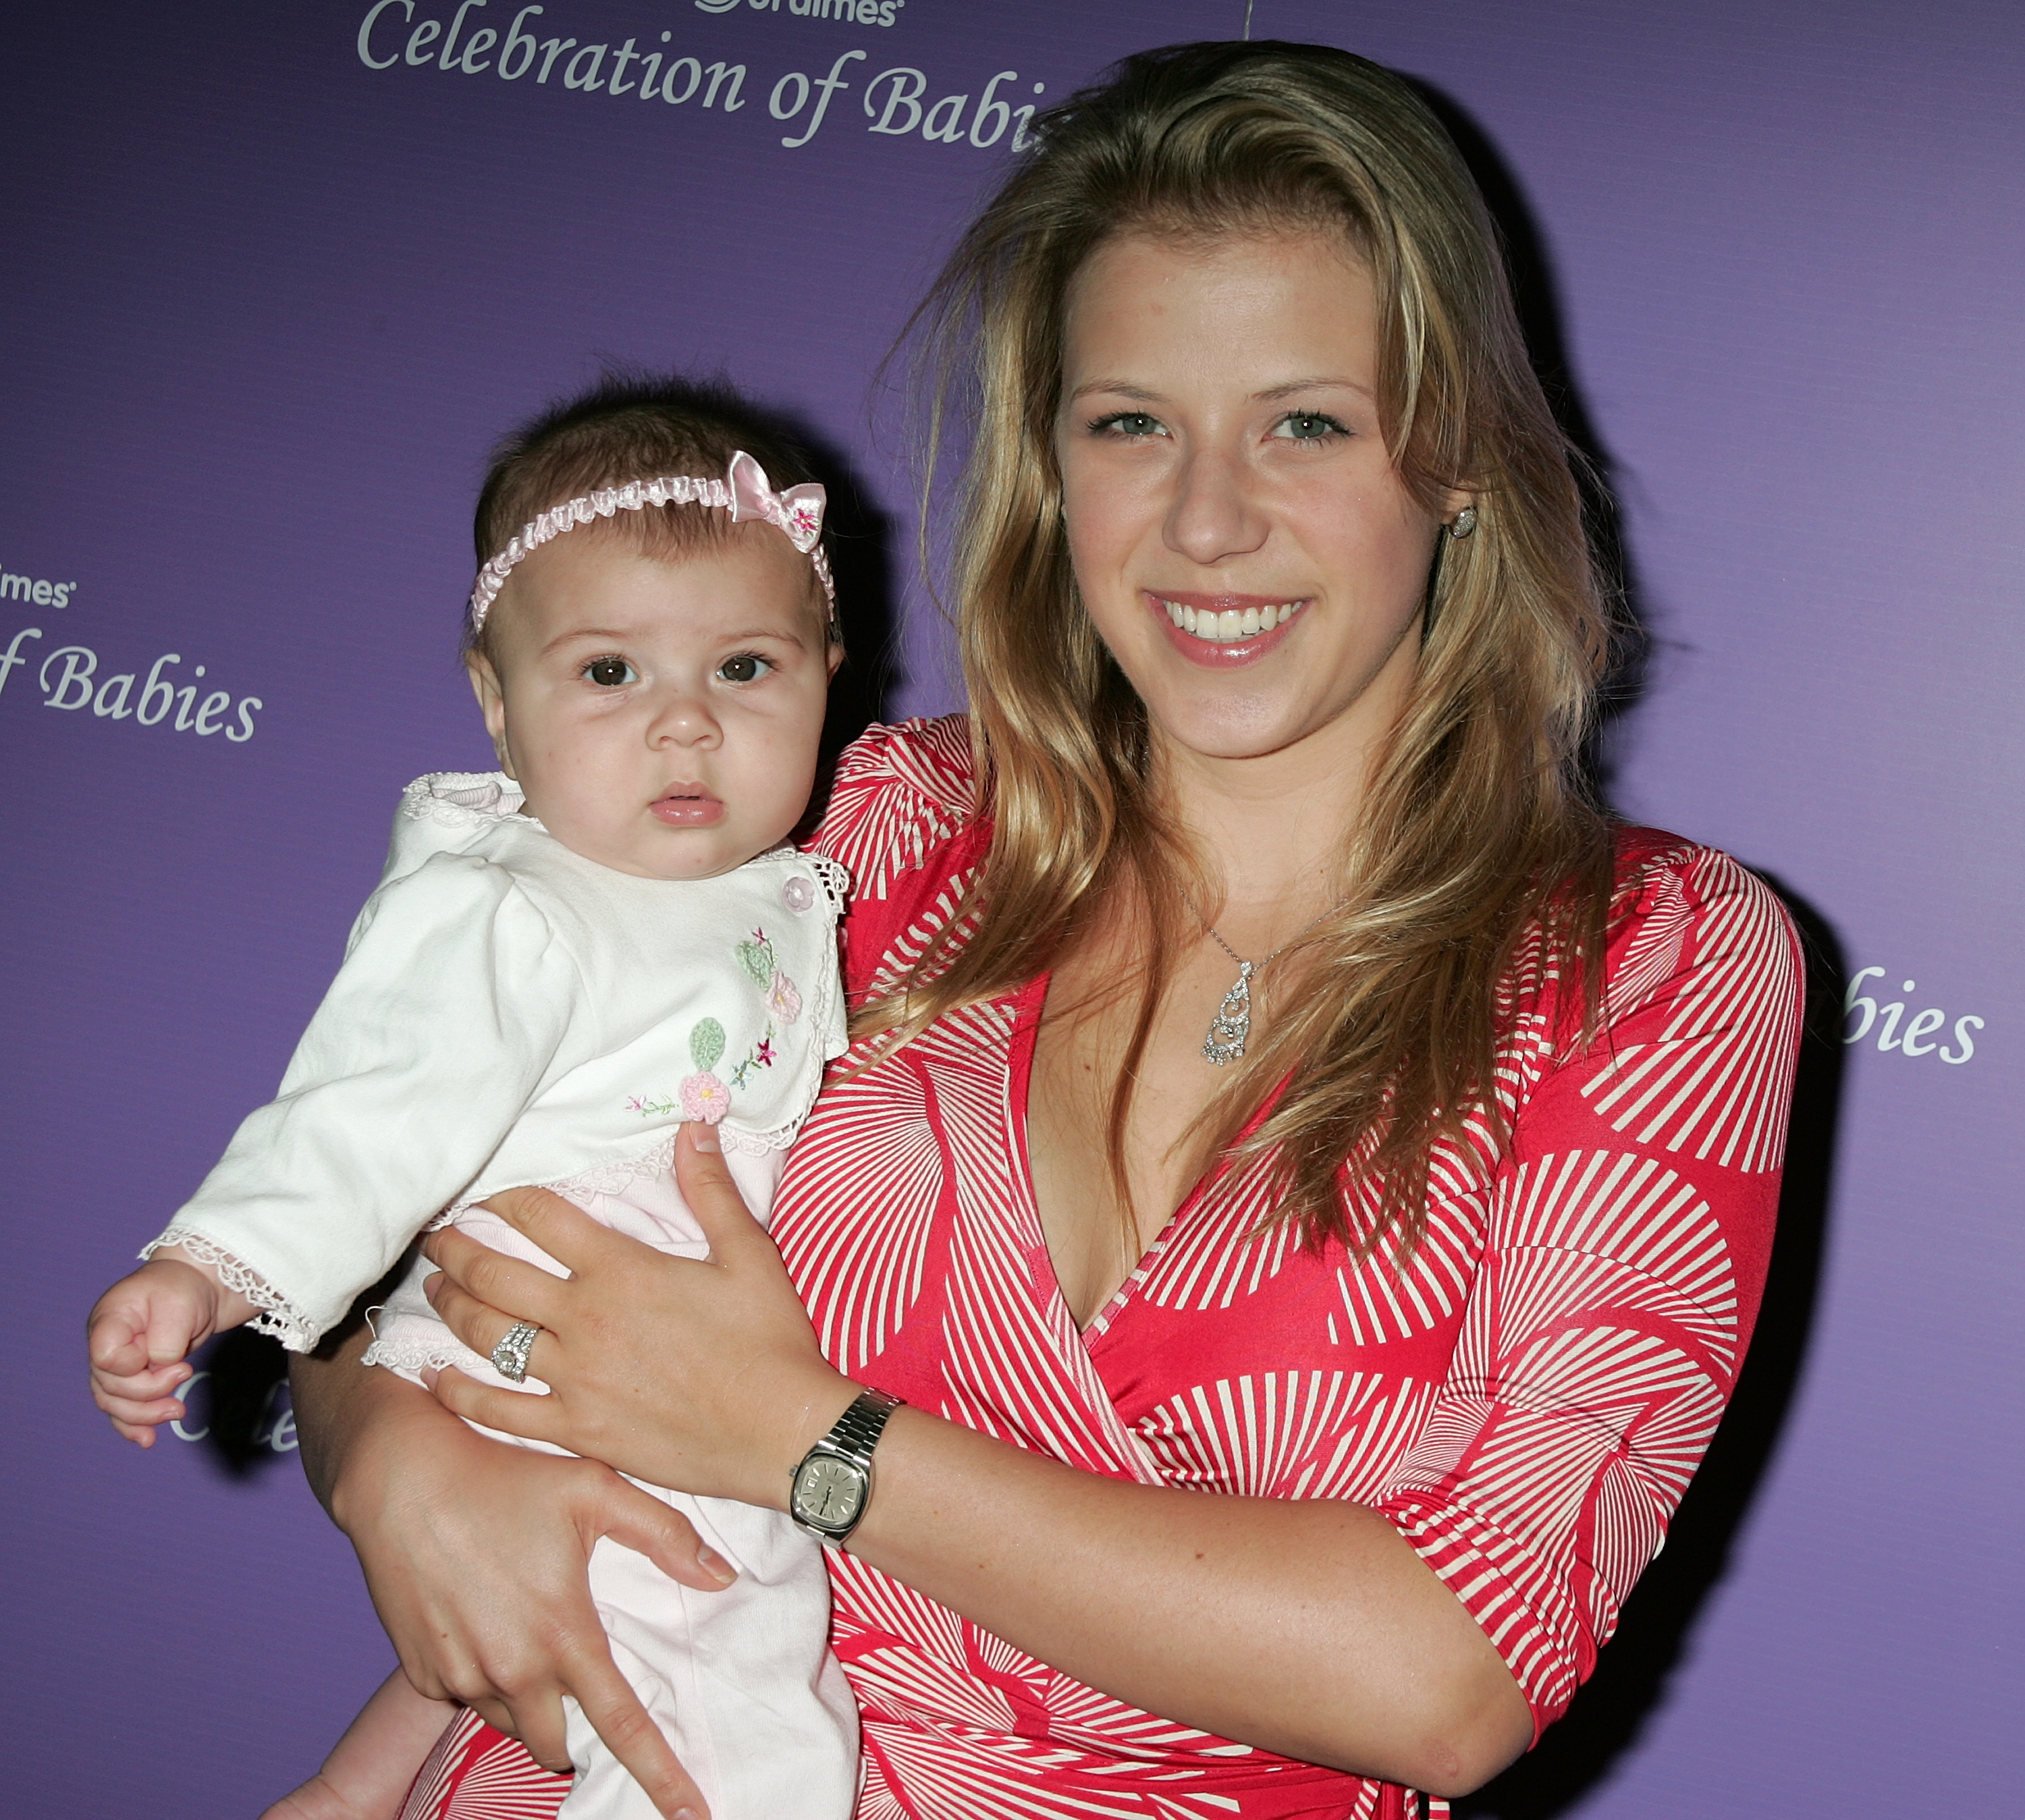 Jodie Sweetin and her daughter Zoie Laurelmae Herpin attend the March of Dimes' Celebration of Babies event at The Beverly Hilton Hotel on September 27, 2008, in Beverly Hills, California. | Source: Getty Images